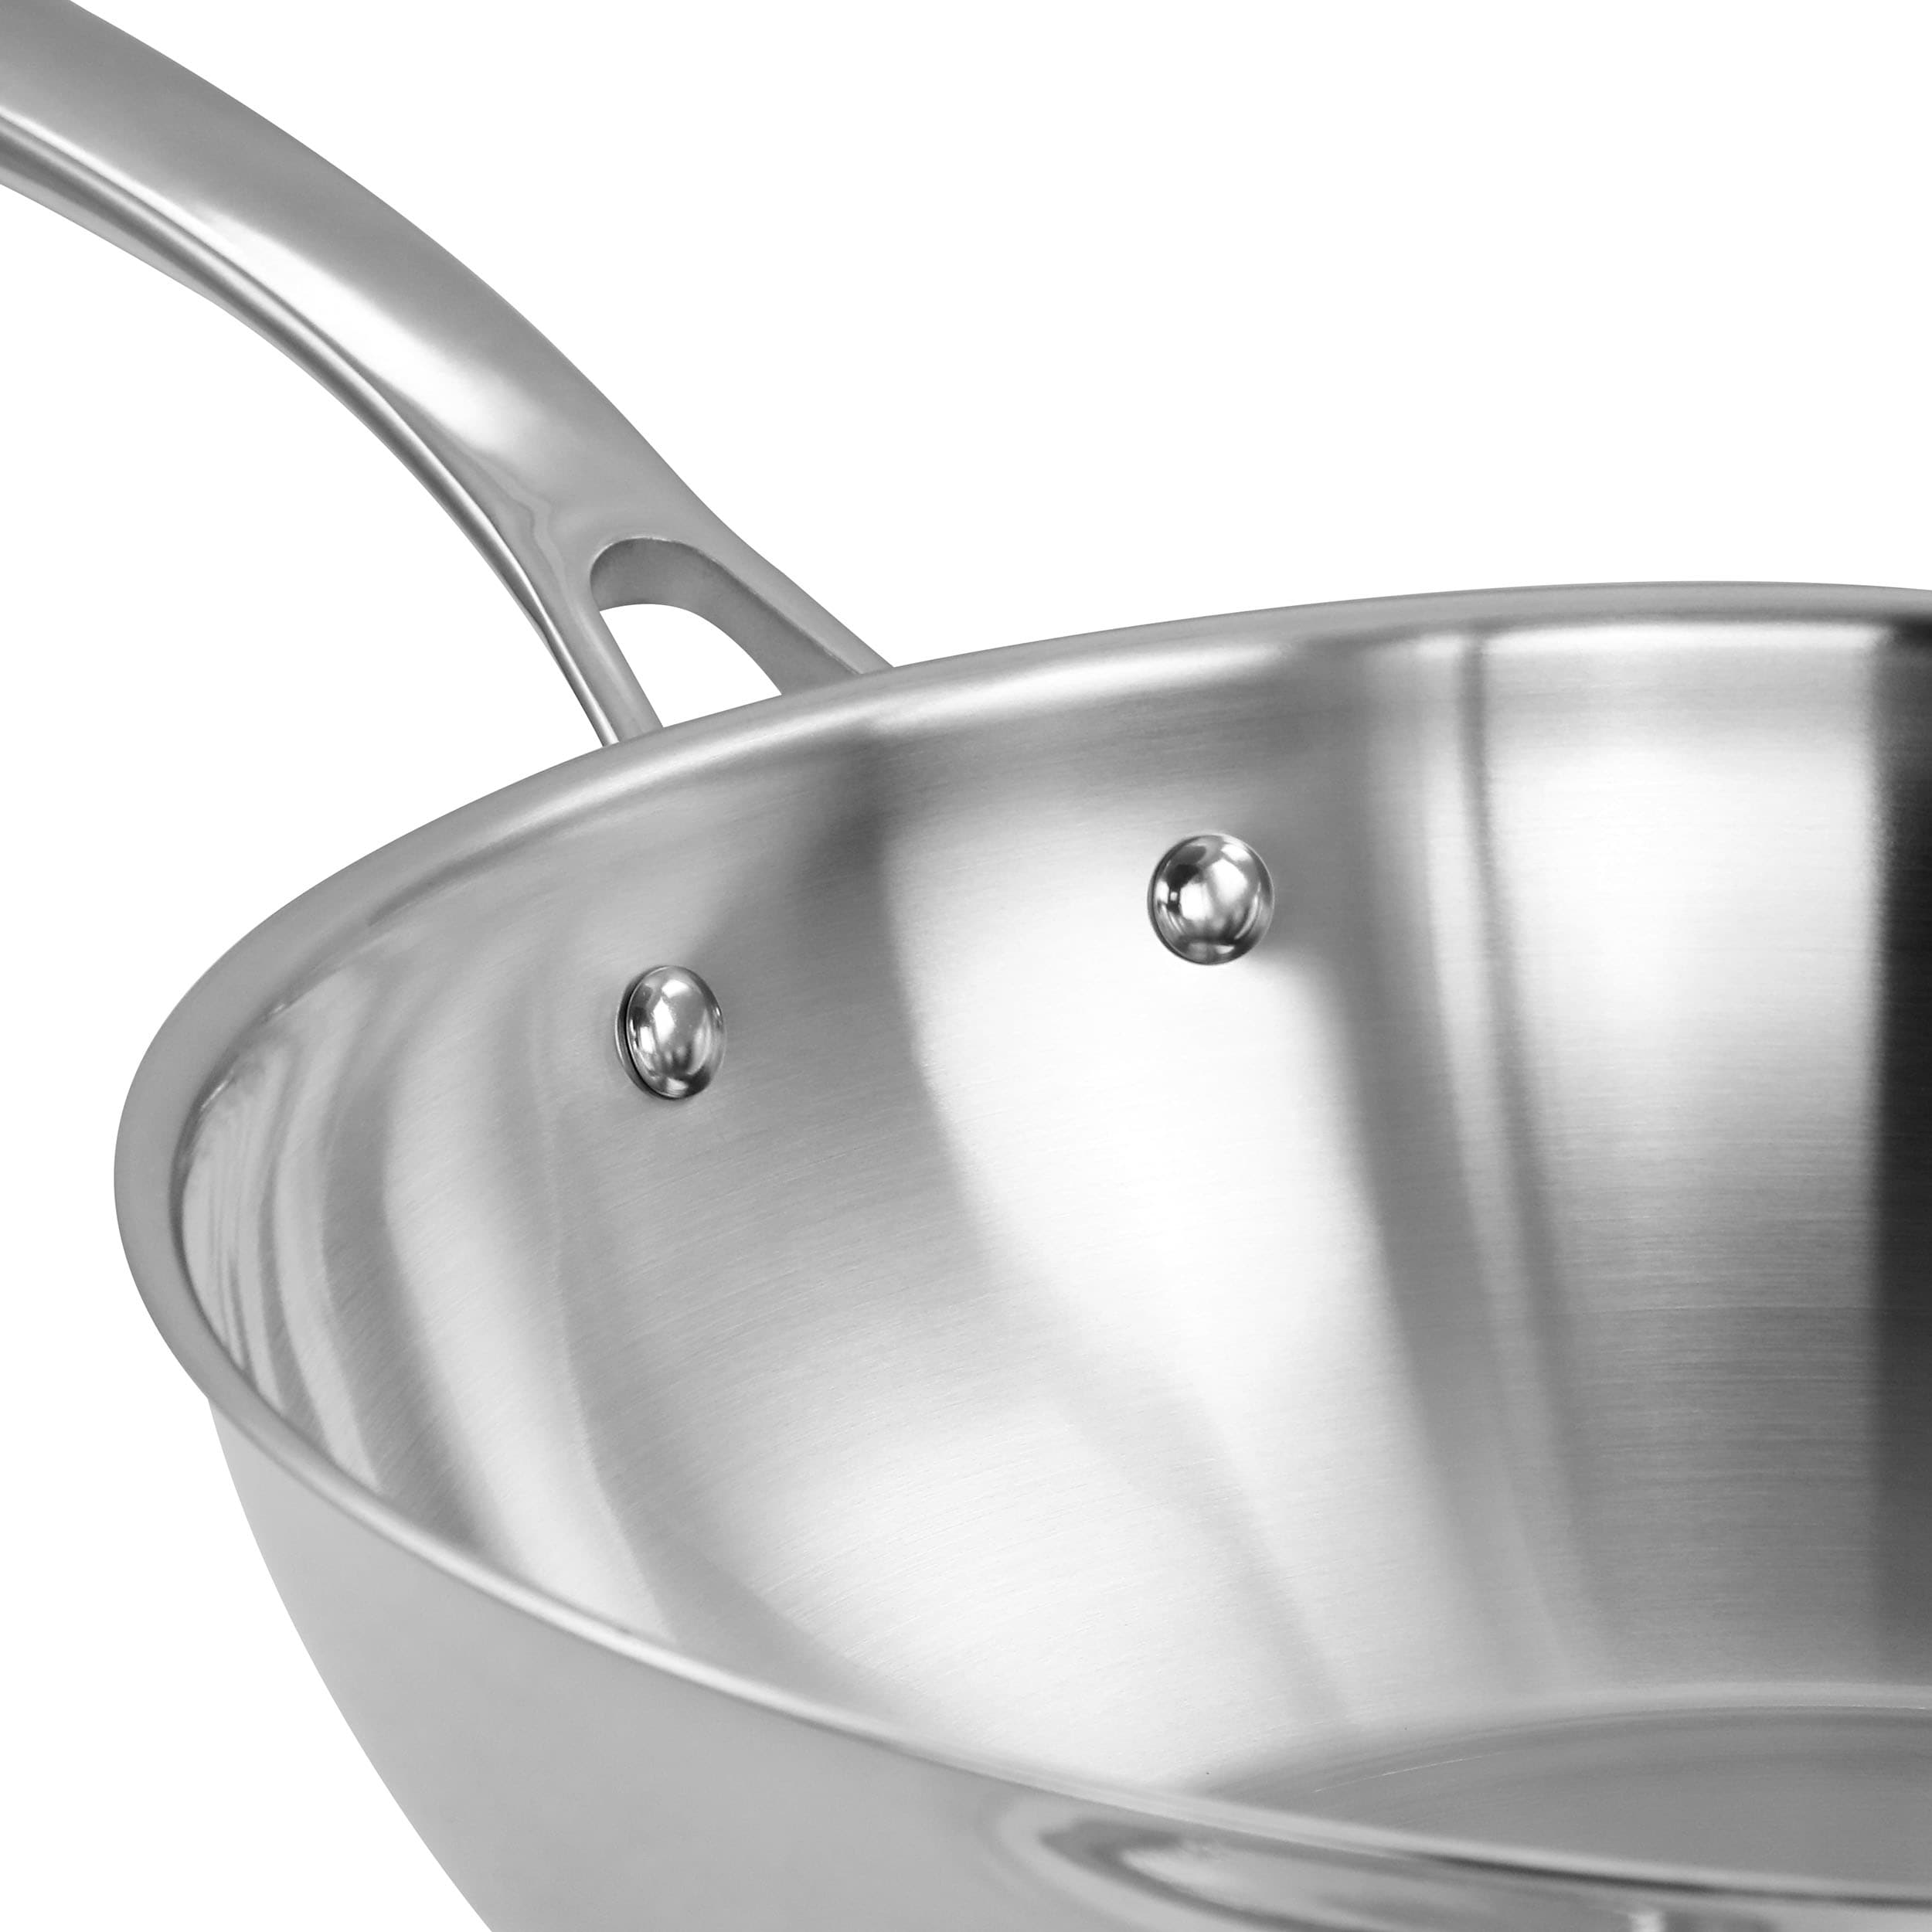 https://ak1.ostkcdn.com/images/products/is/images/direct/4bb1db2a6f3c5c88e1b5264fcdf4cec7eb5f61fb/Martha-Stewart-Stainless-Steel-Essential-12-Inch-Pan-with-Lid.jpg